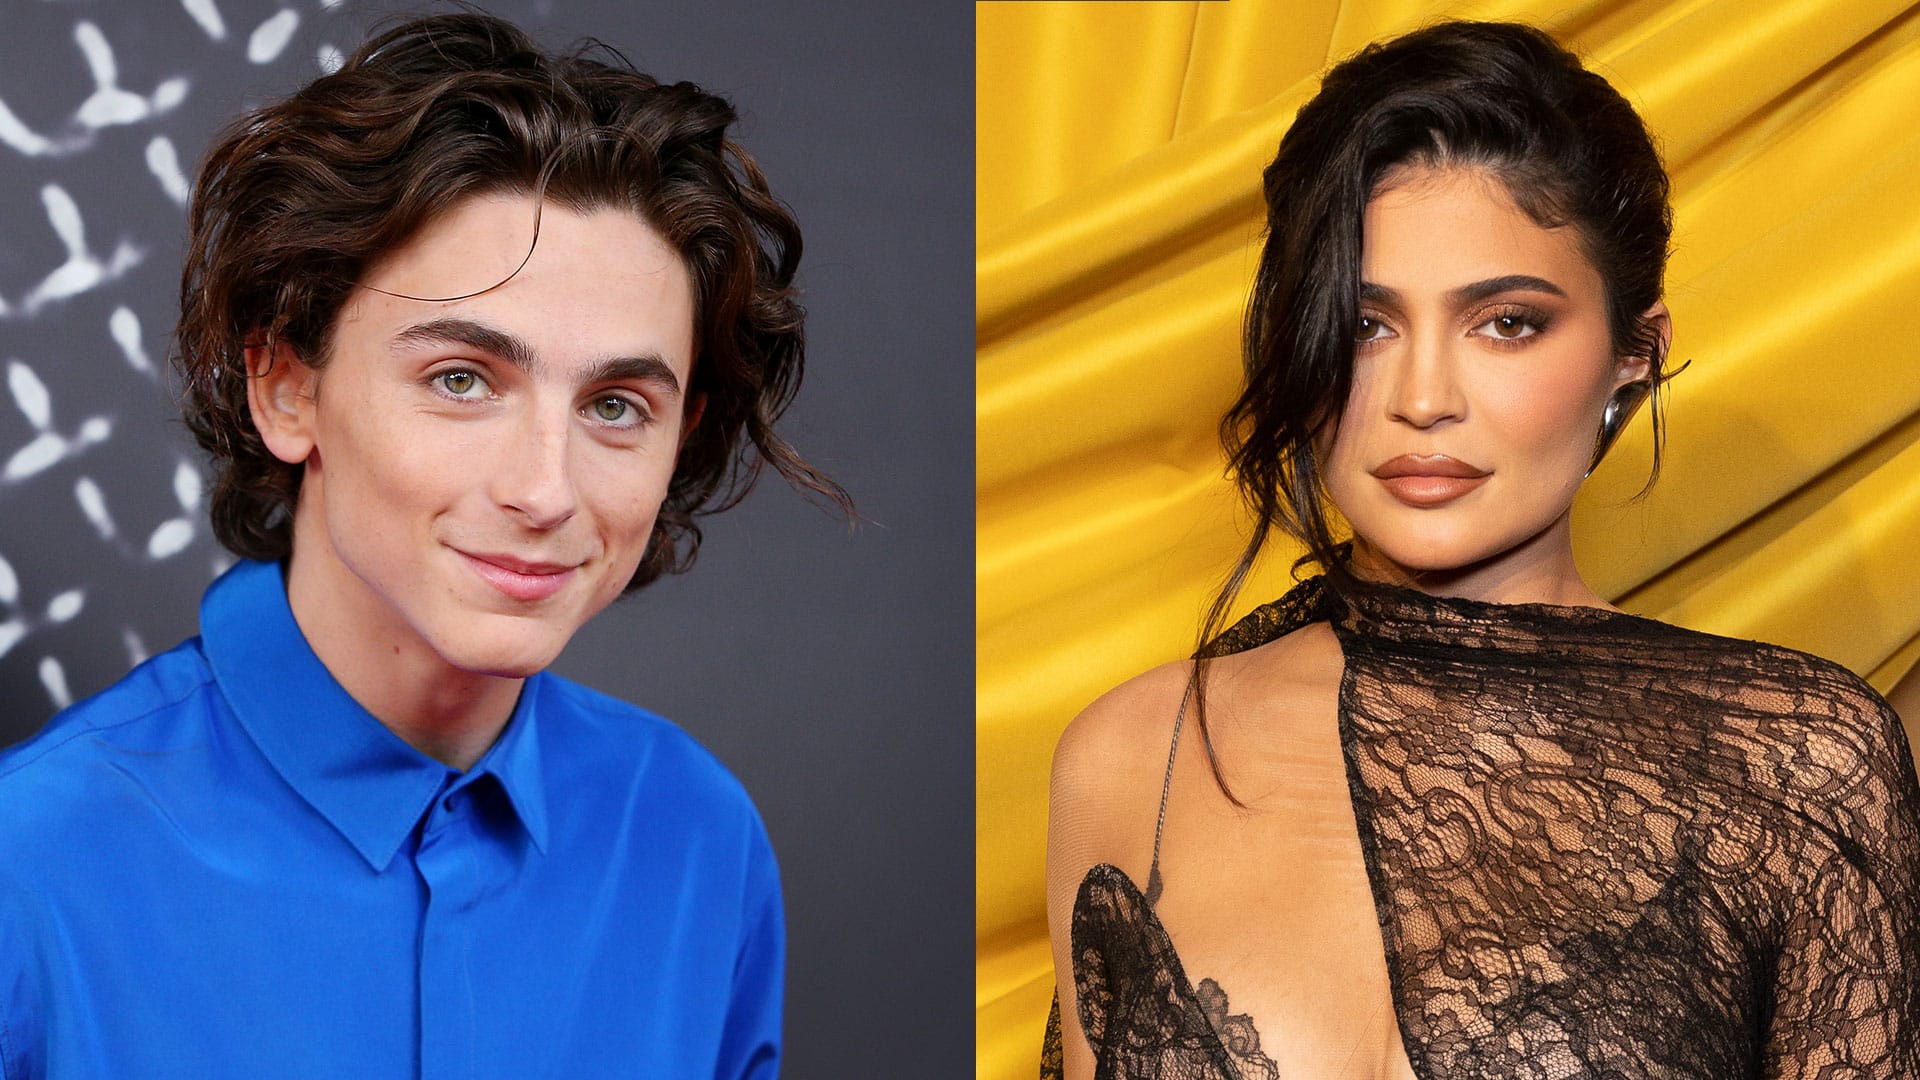 Kylie Jenner attends the #BoF500 gala during Paris Fashion Week Spring/Summer 2023 on October 01, 2022 in Paris, France. Timothee Chalamet attends the Australian premiere of THE KING at Ritz Cinema on October 10, 2019 in Sydney, Australia